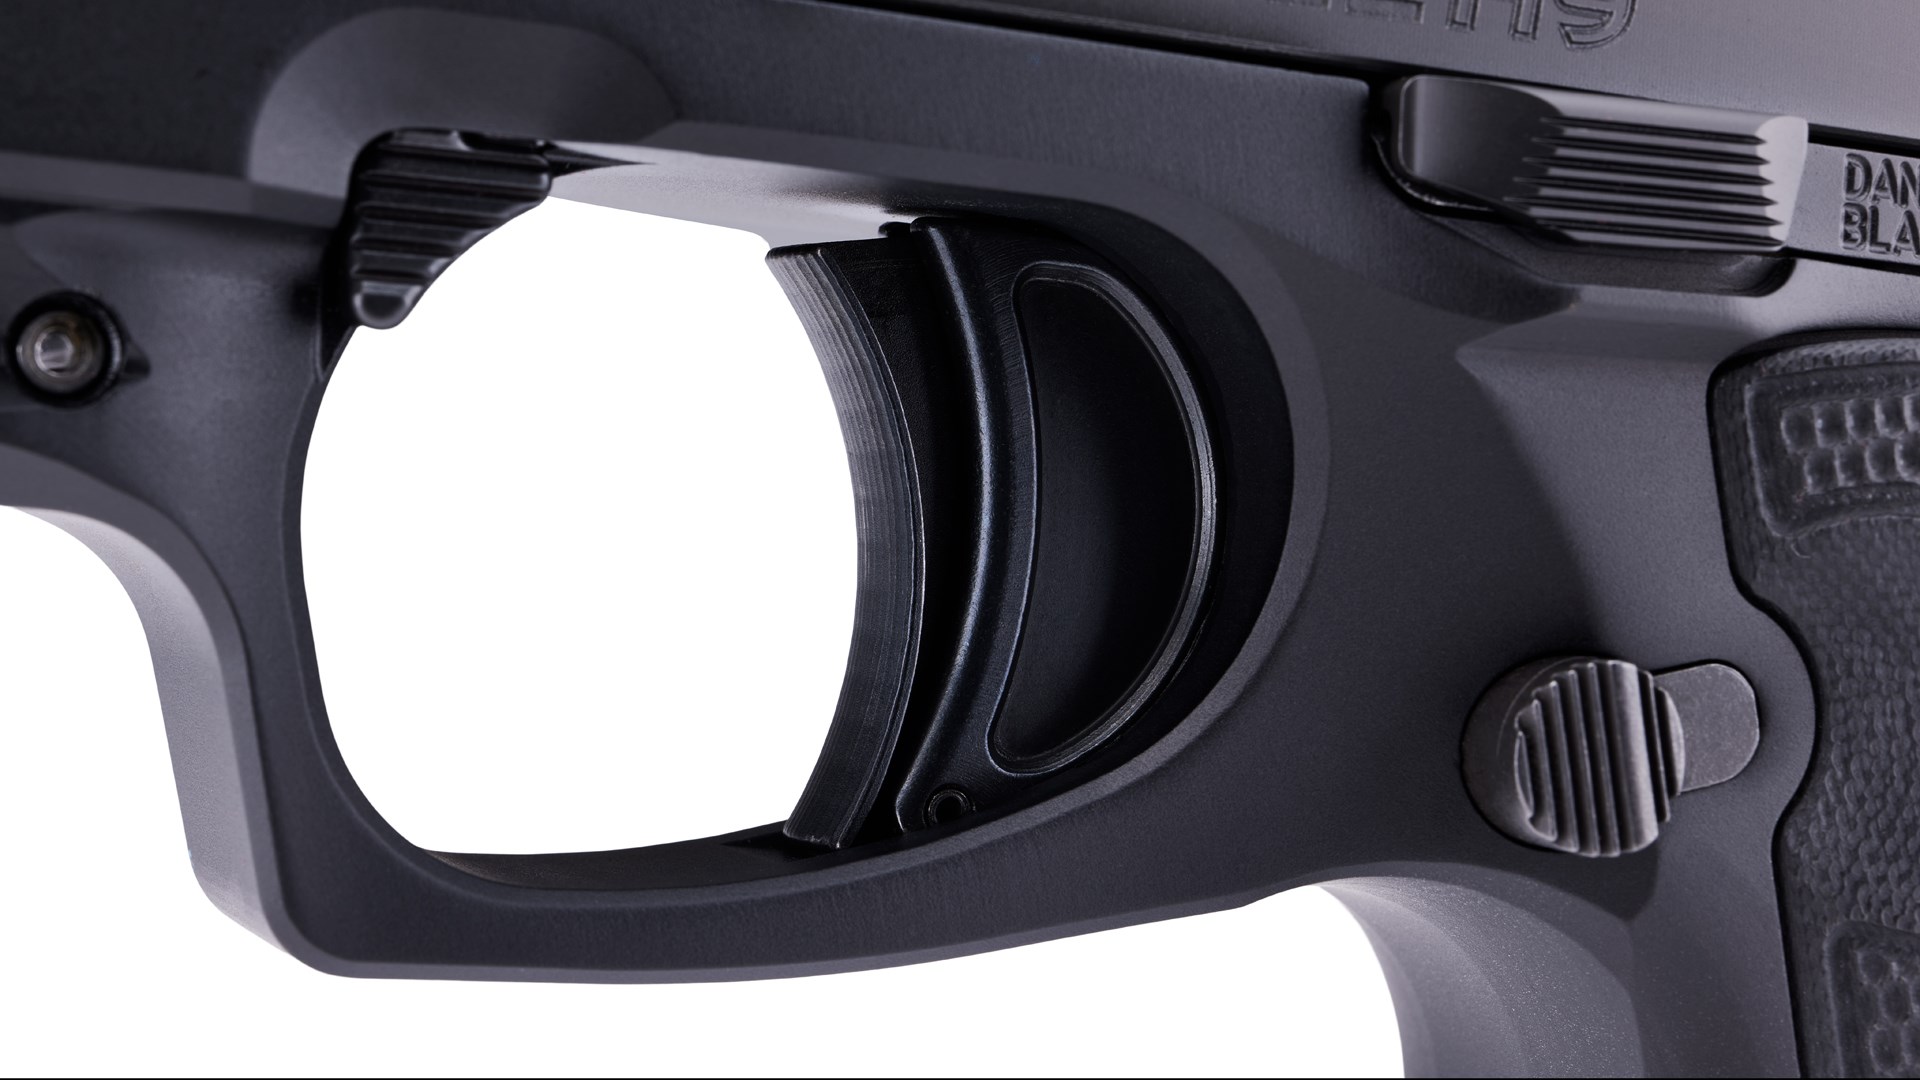 Trigger, magazine release and slide-stop lever on the left side of the Daniel Defense H9.